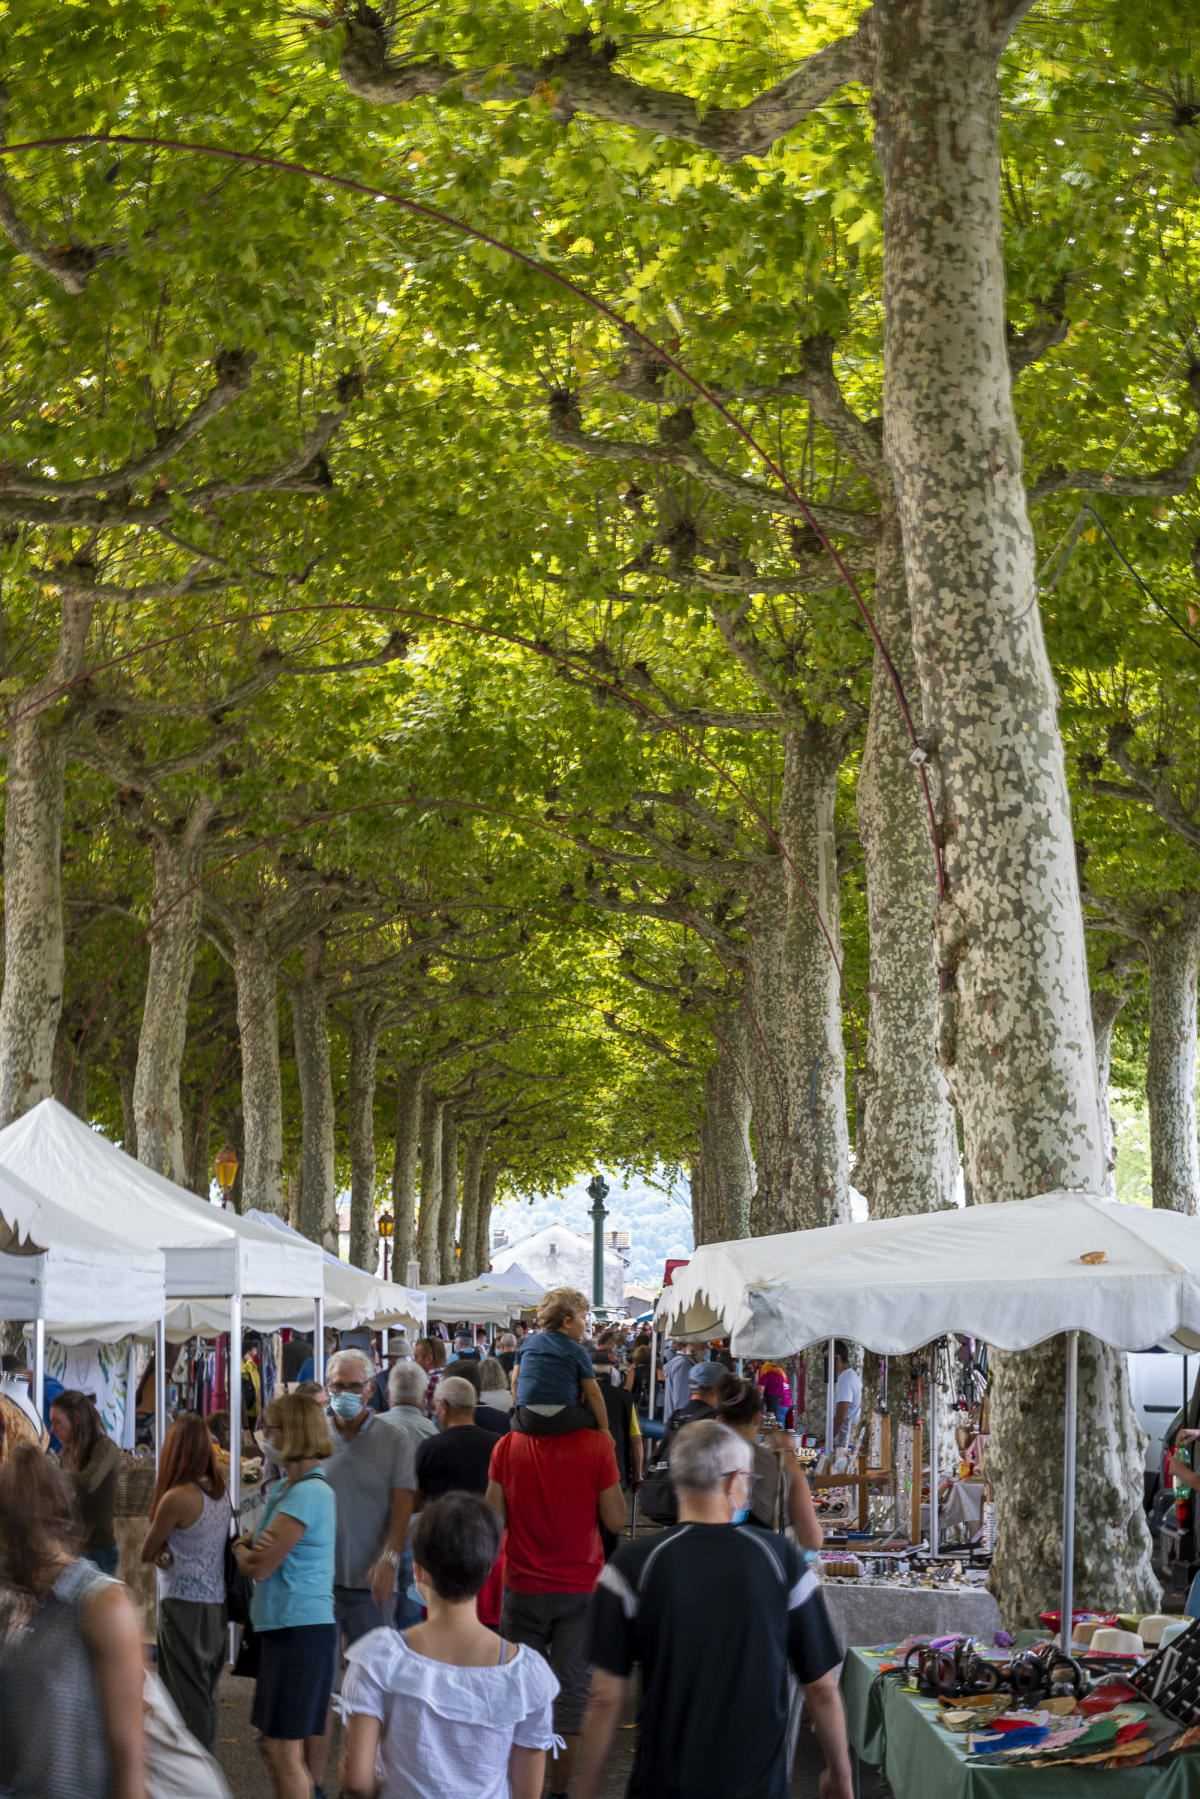 The Saint-Girons market, September 4, 2021, in Ariège, brings together producers and artisans from neighboring valleys.